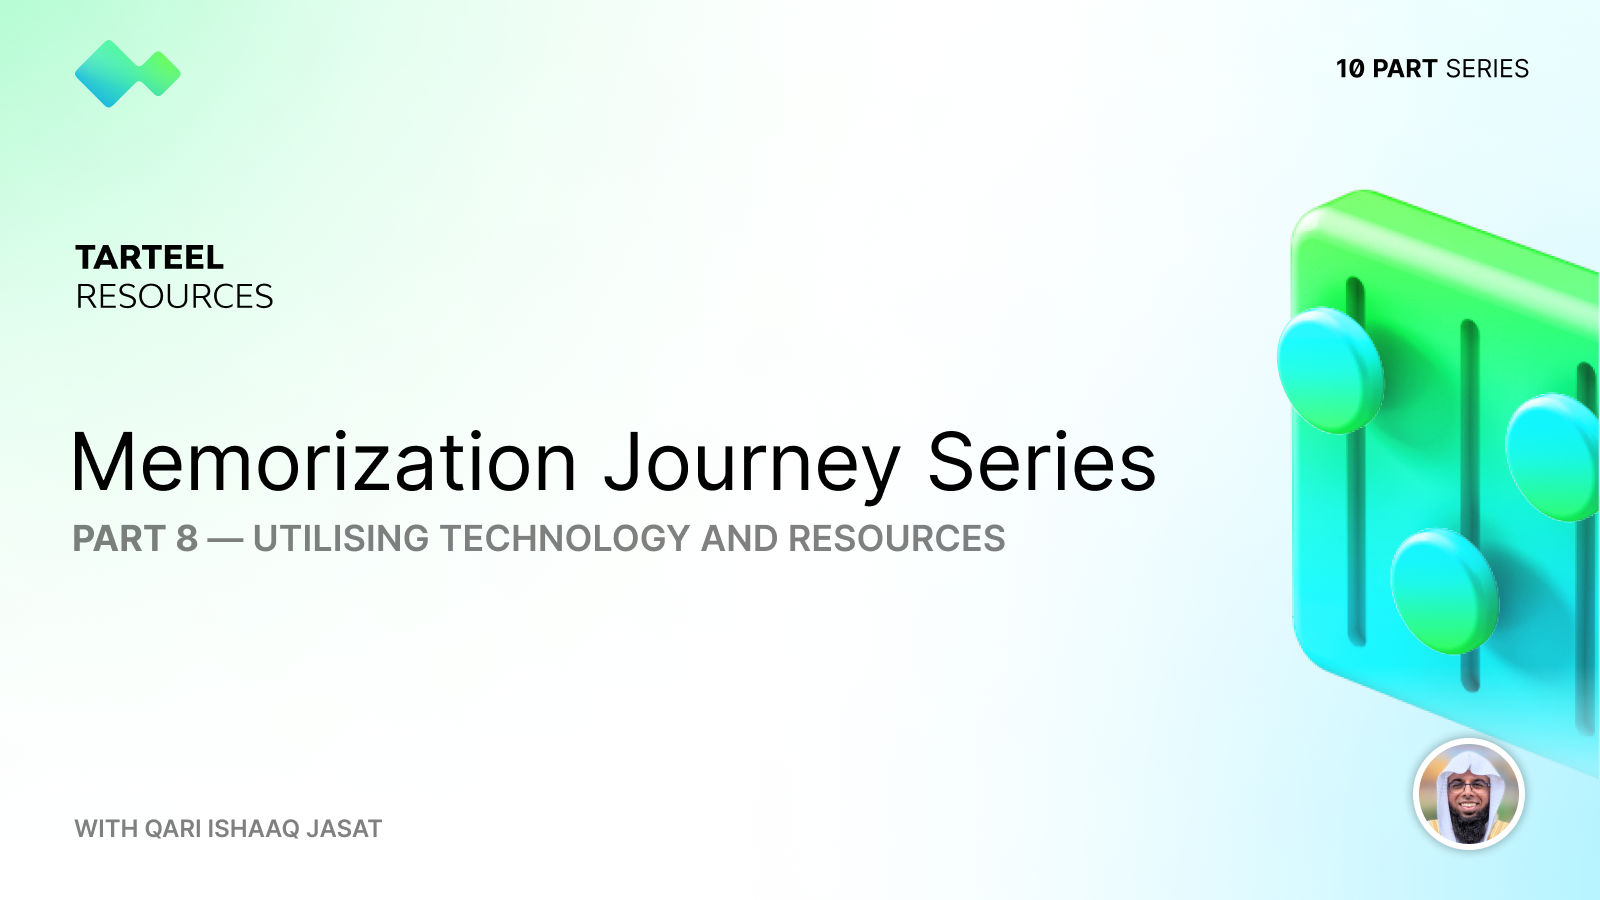 Quran Memorization Journey Tips — Utilizing Technology and Resources